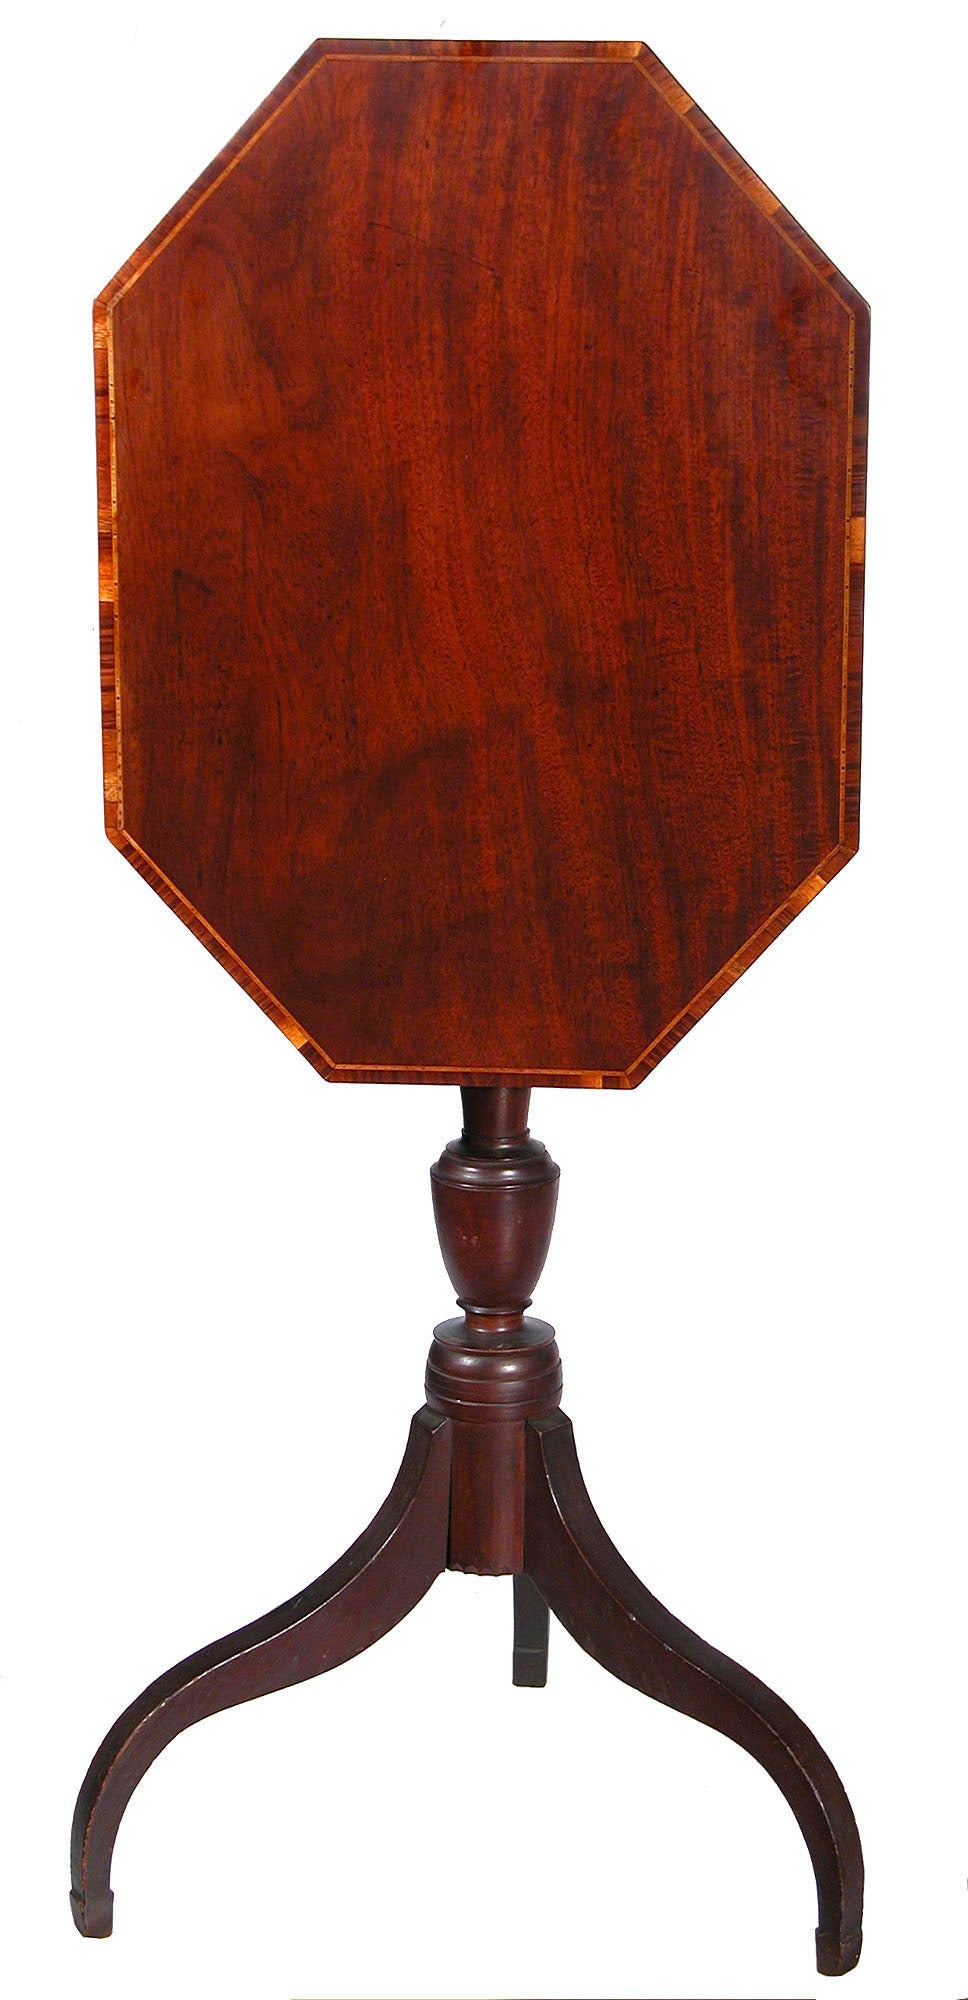 This tilt-top table has a solid top of figured mahogany. Of most interest is the fine inlaid banding around the top. Note the multicolored inlay strip which is bordered by a variegated banding, which is composed of a multitude of contrasting woods